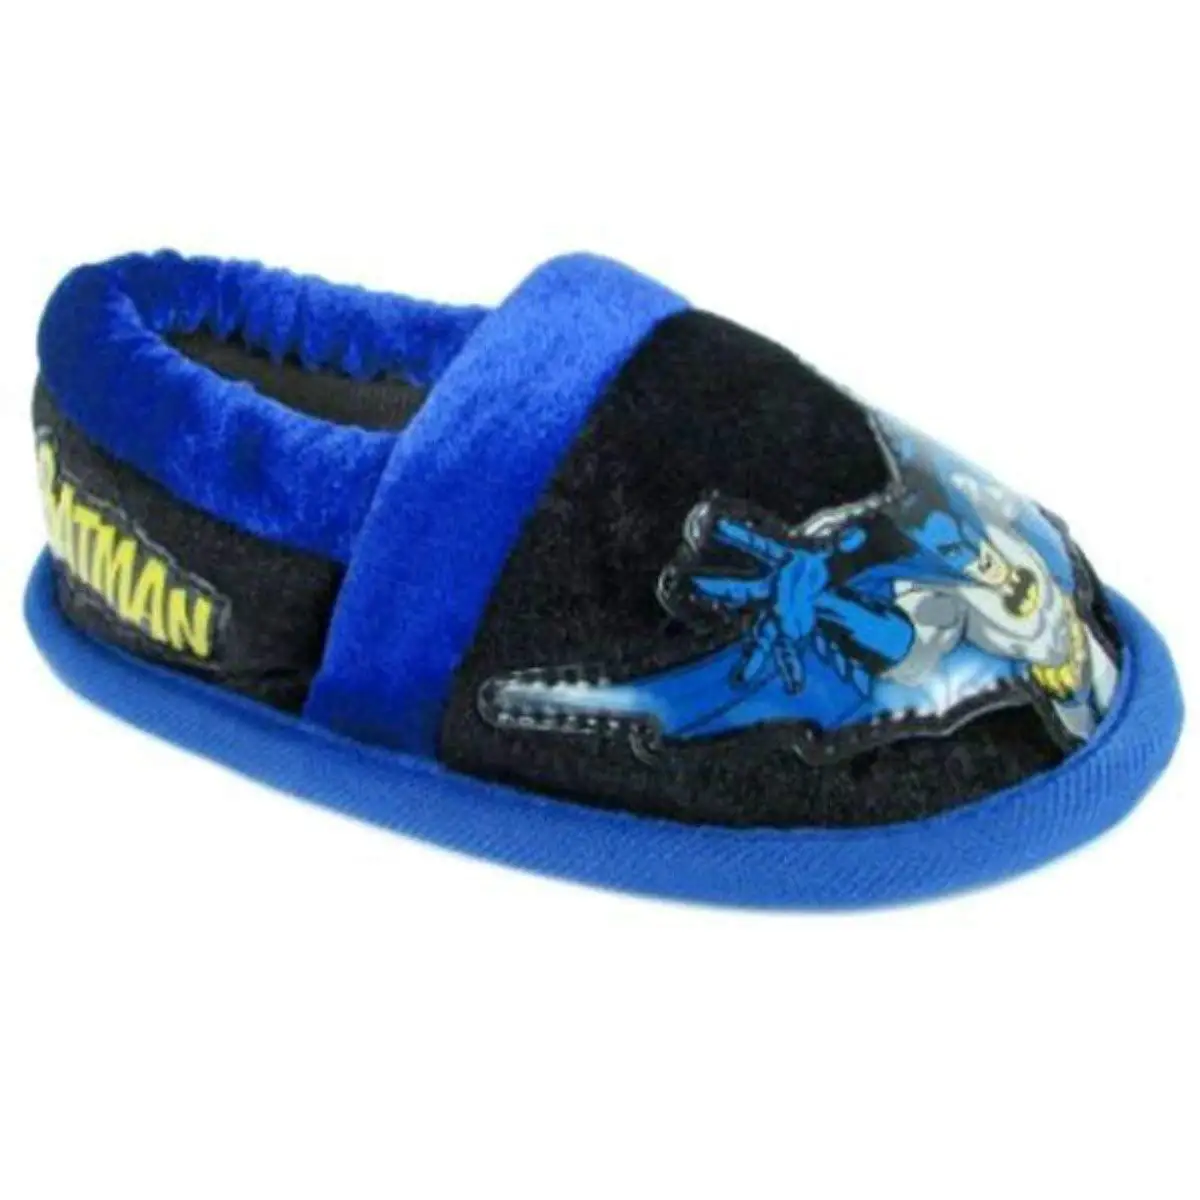 superman slippers for adults